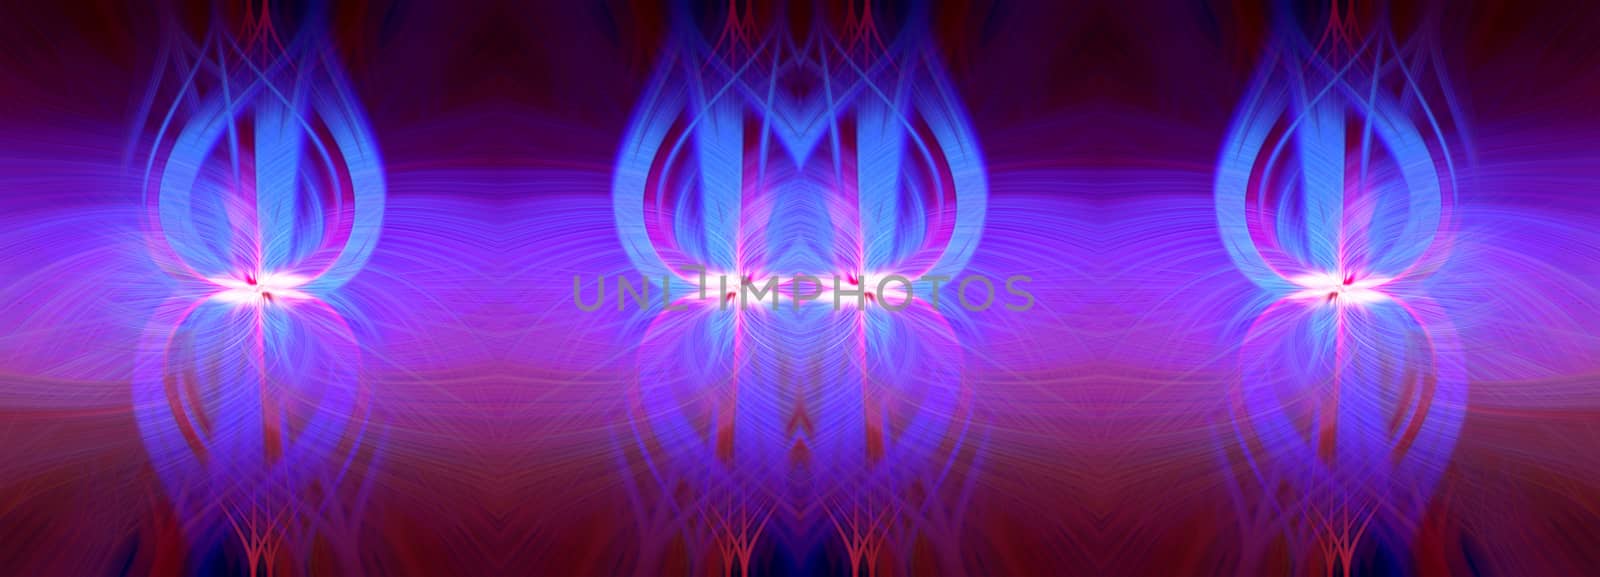 Beautiful abstract intertwined 3d fibers forming a shape of sparkle, flame, flower, interlinked hearts. Pink, blue, maroon, and purple colors. Illustration. Banner and panorama size